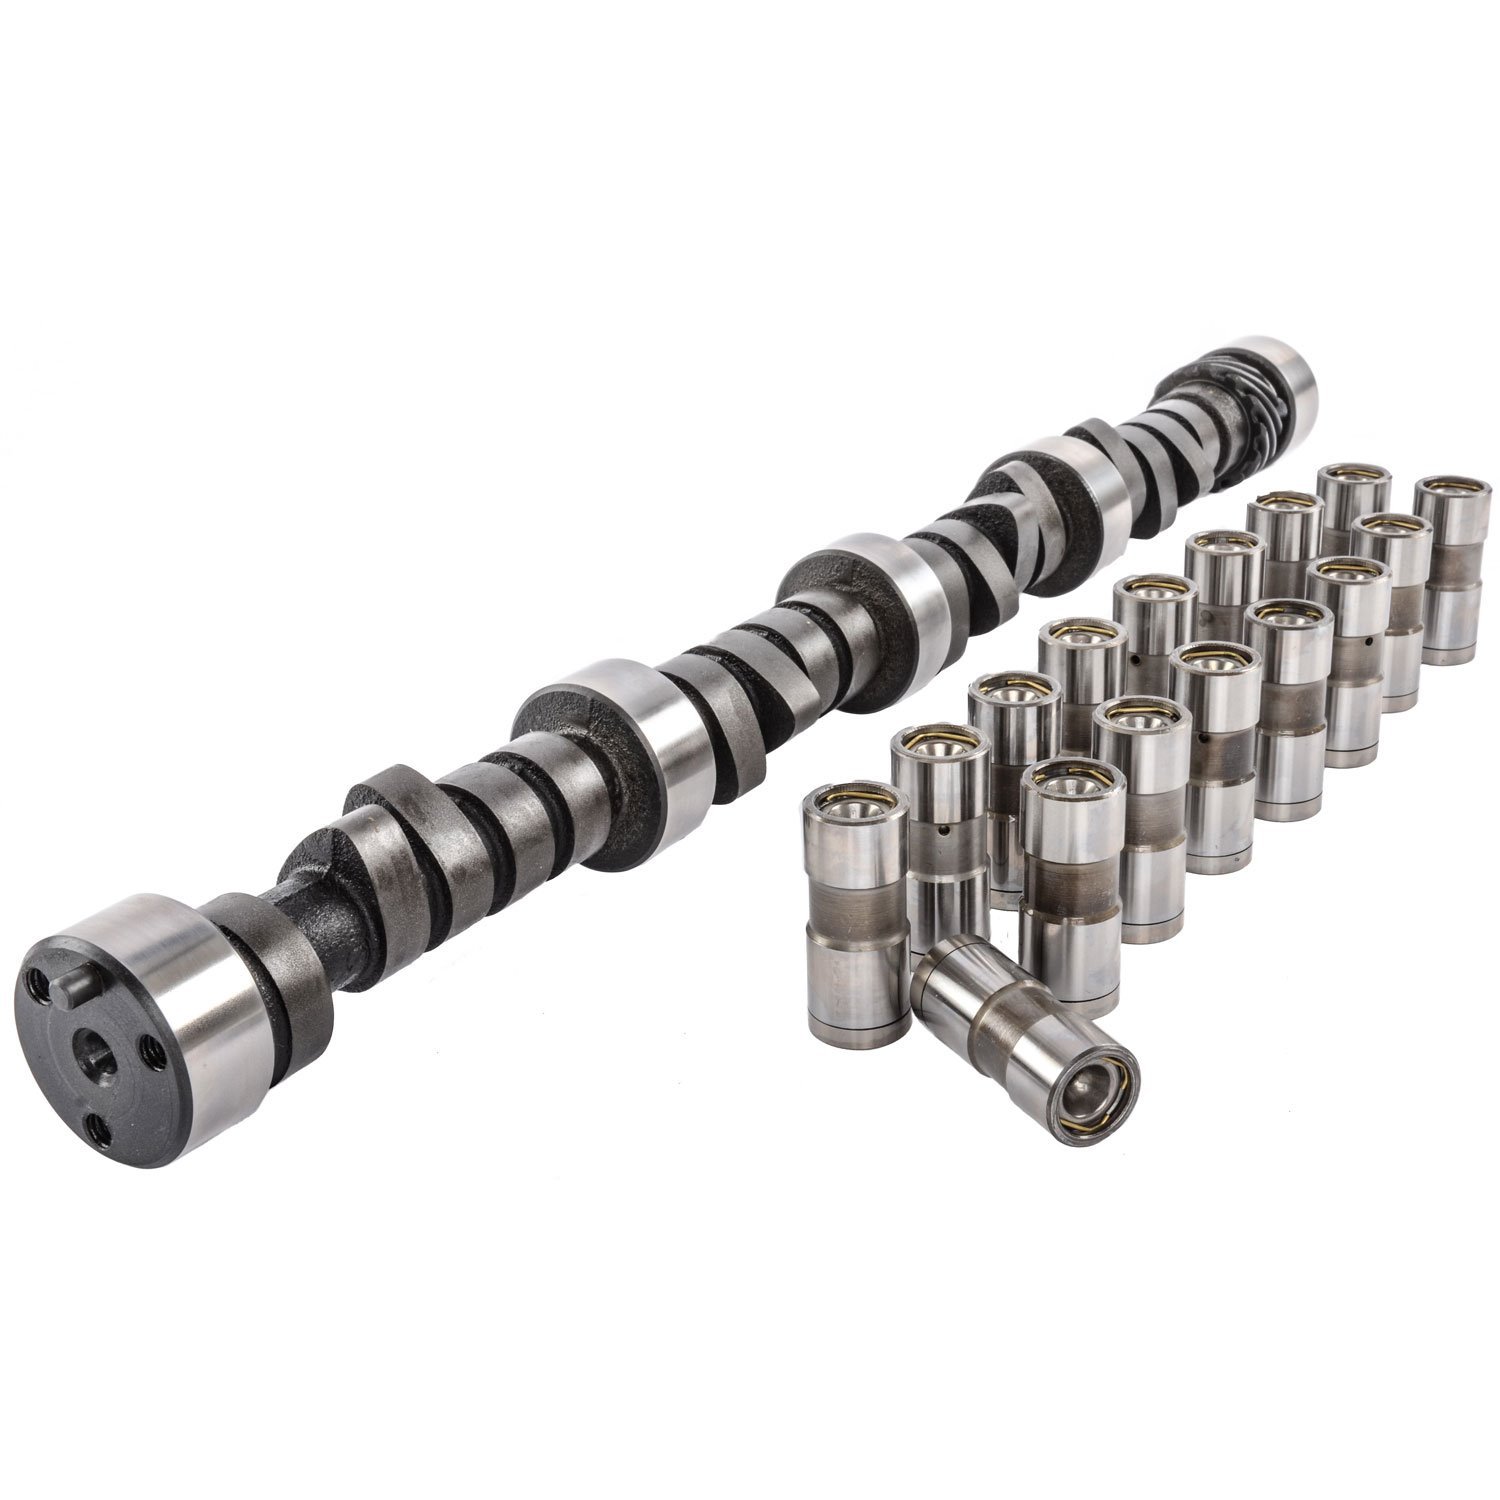 Hydraulic Flat Tappet Camshaft and Lifter Kit for 1957-1985 Small Block Chevy 262-400 ci